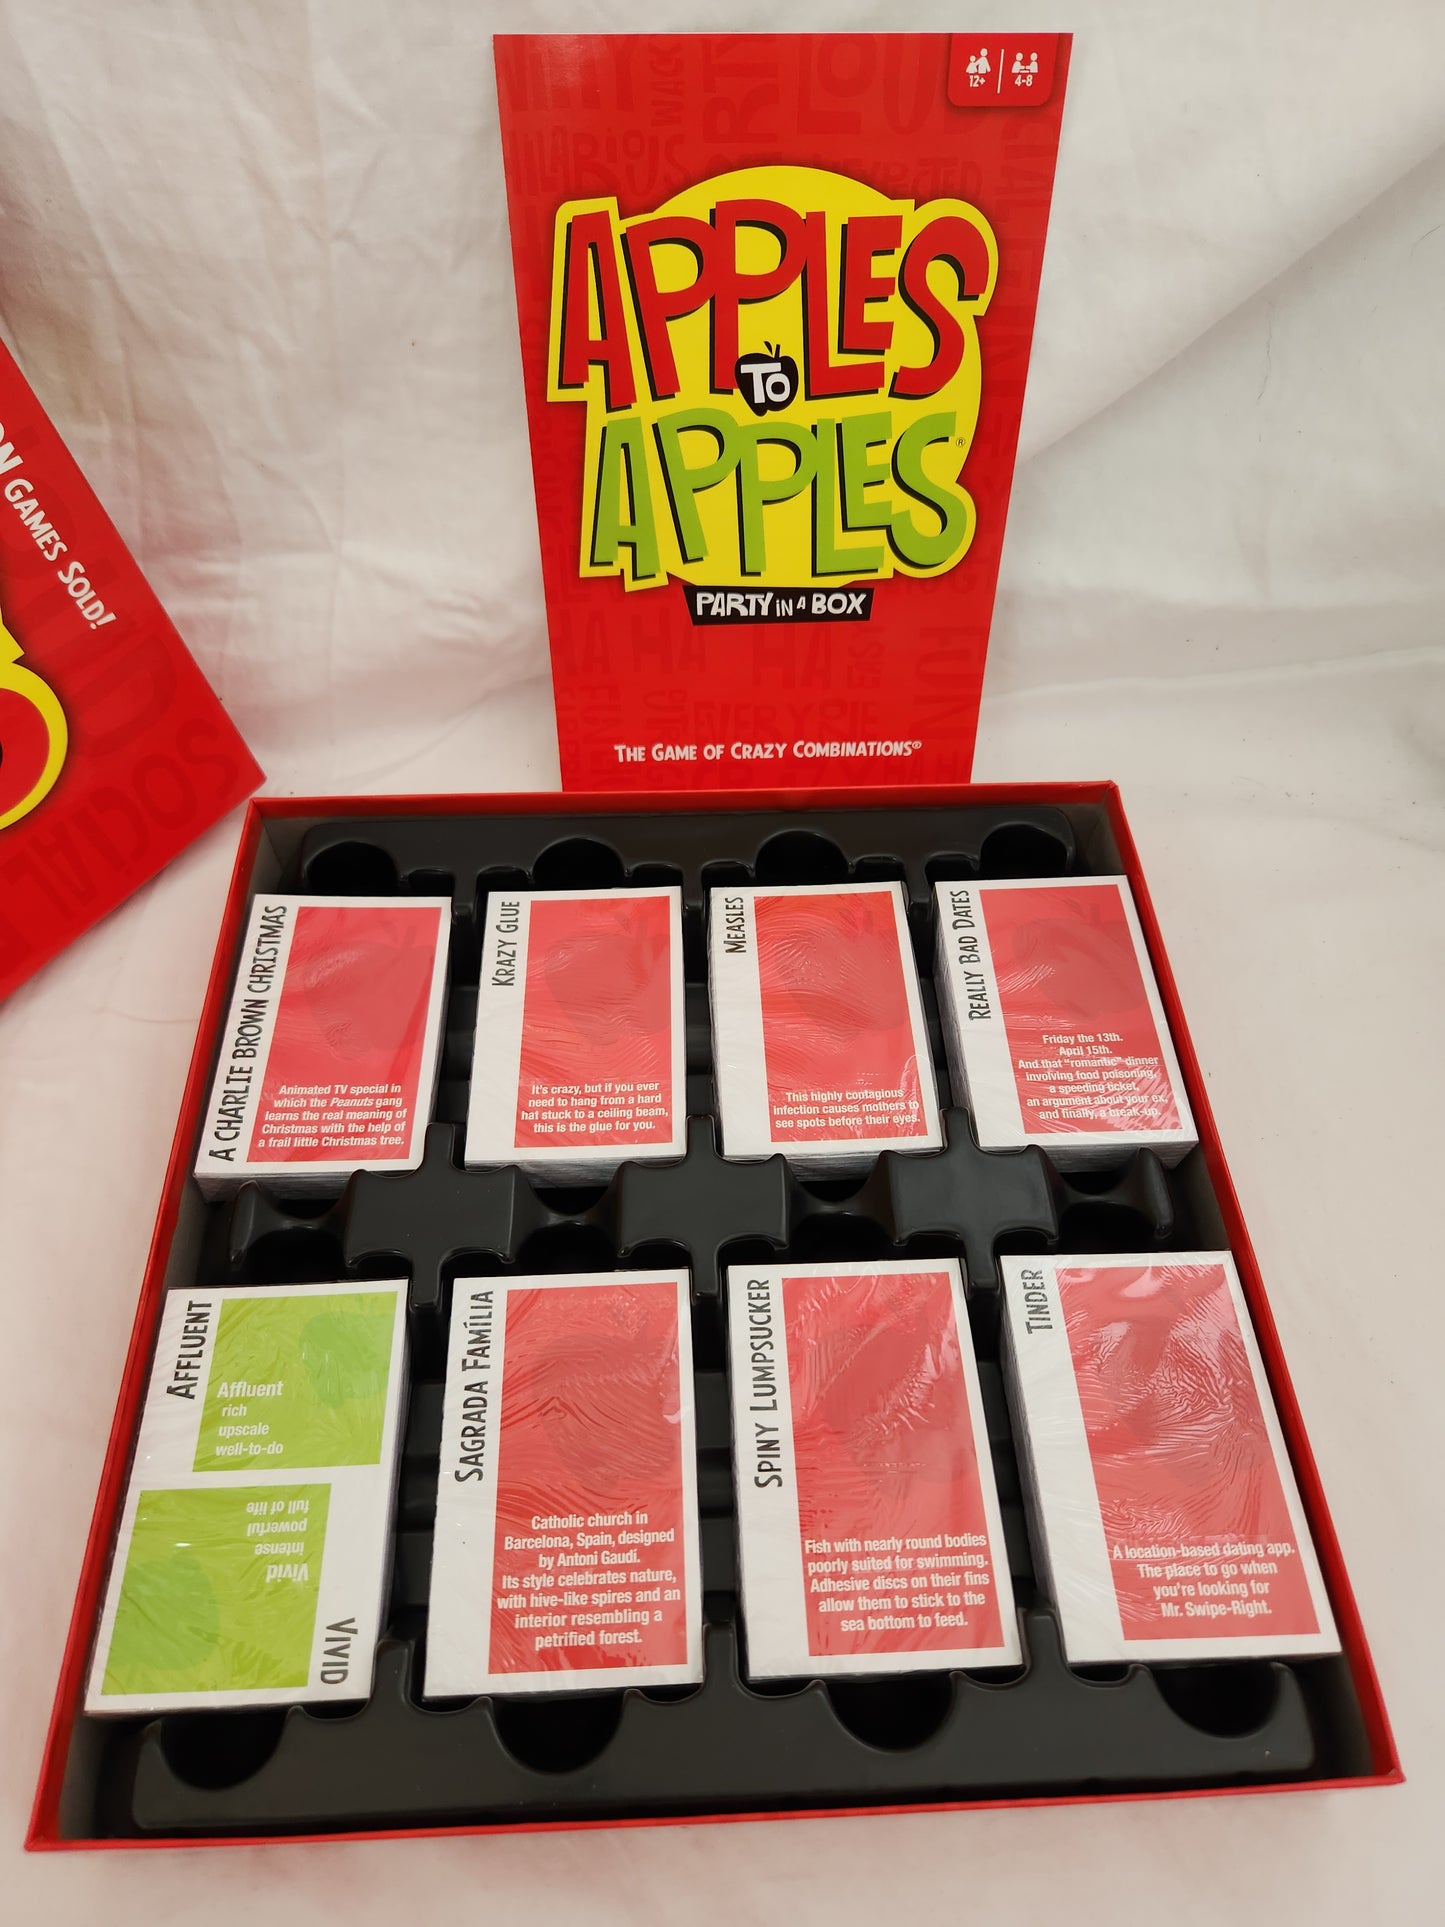 Apples to Apples Party in a Box Game